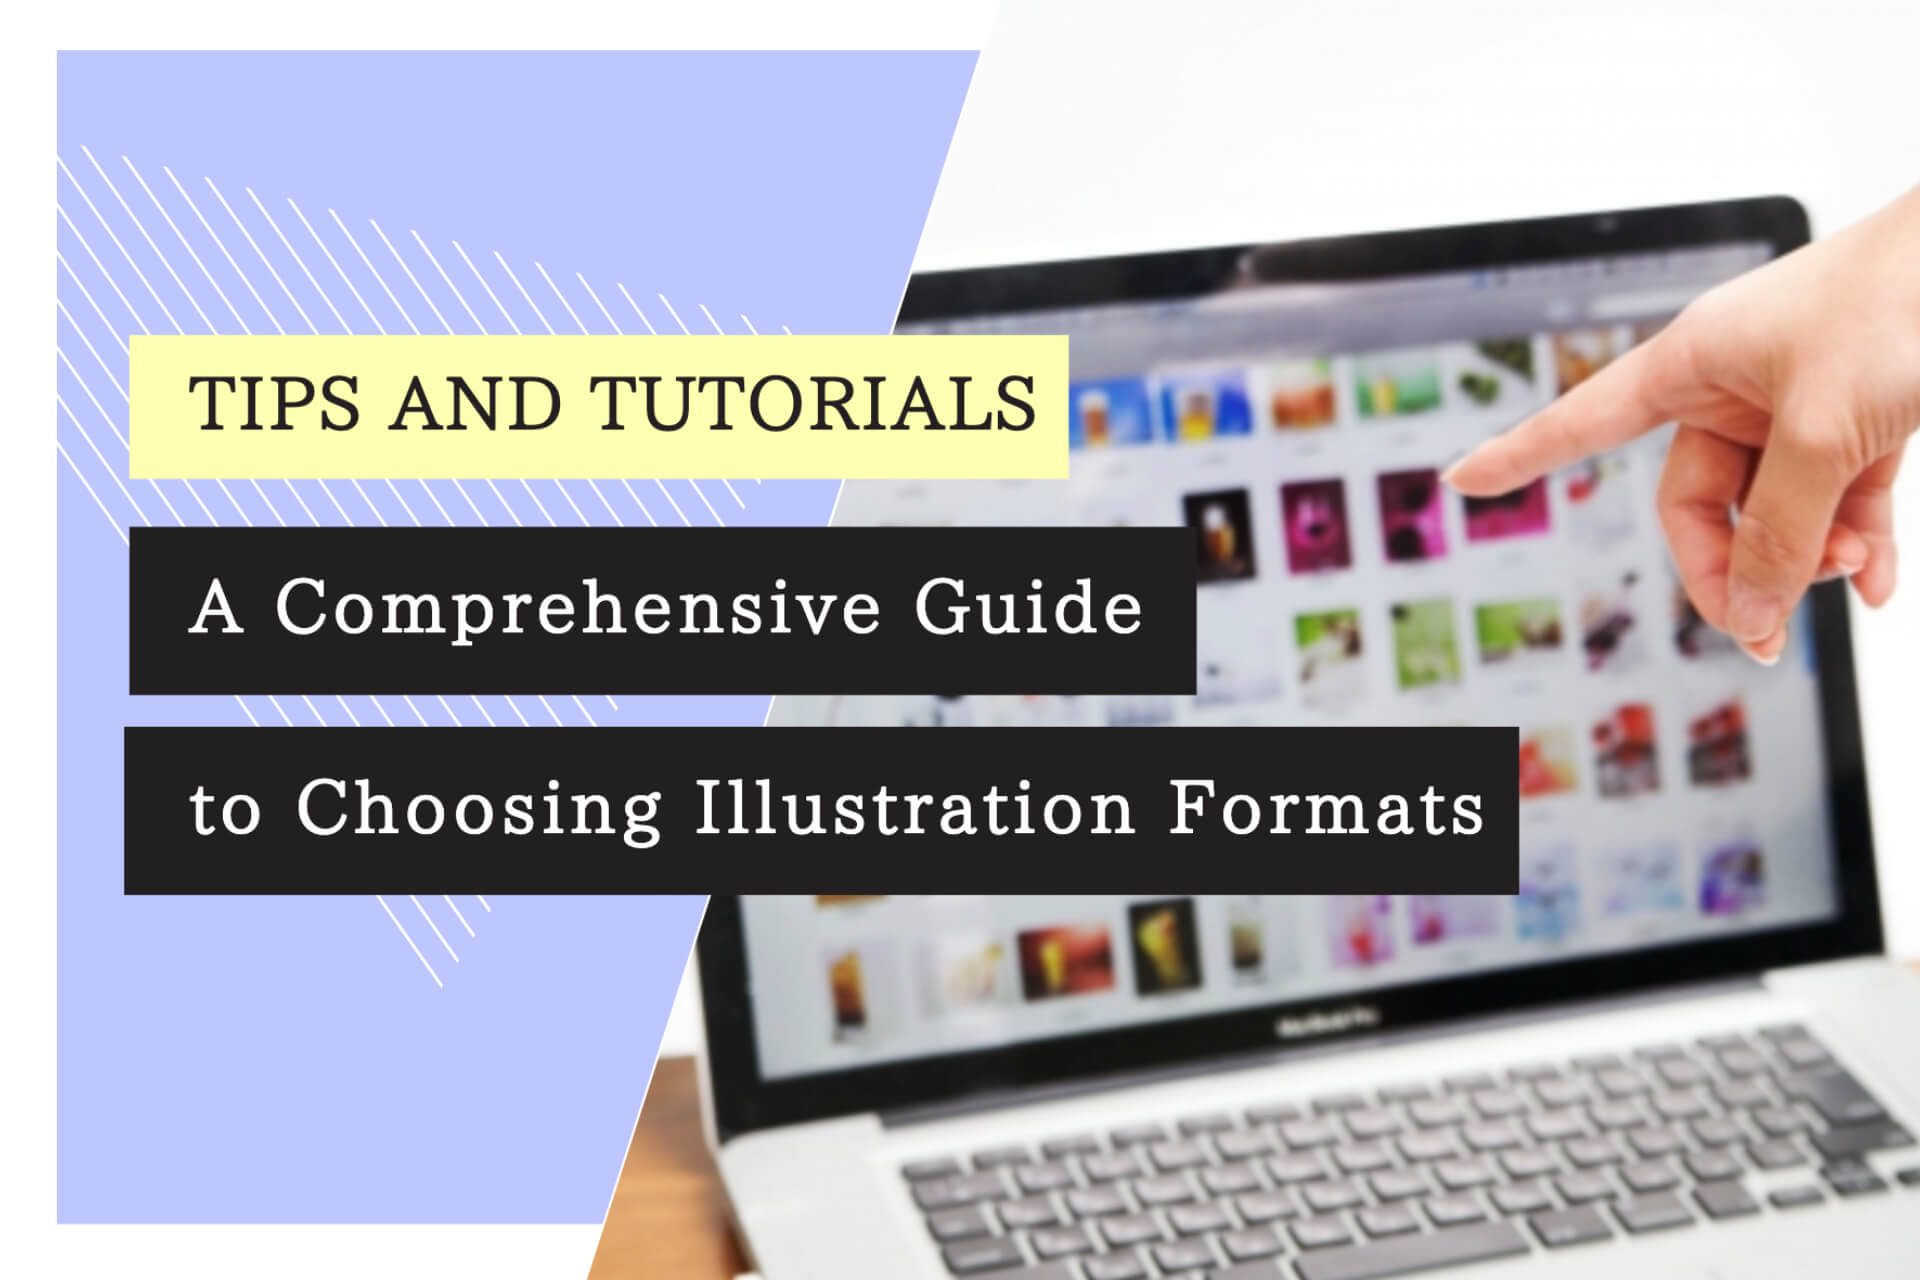 A Comprehensive Guide to Choosing Illustration Formats: The 4 Most Common Formats to Use